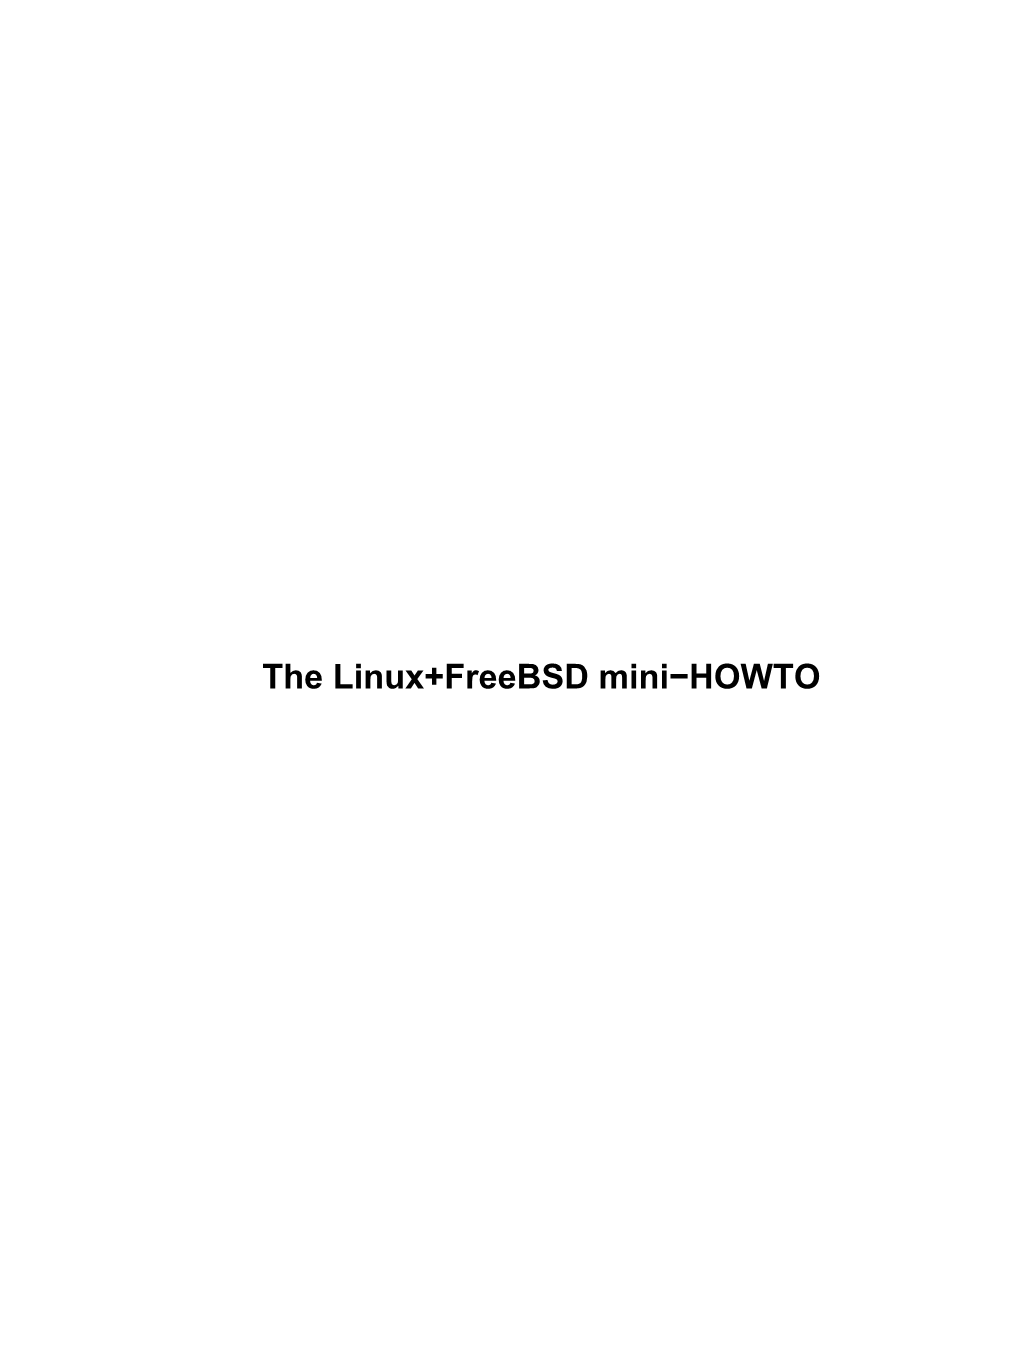 The Linux+Freebsd Mini-HOWTO